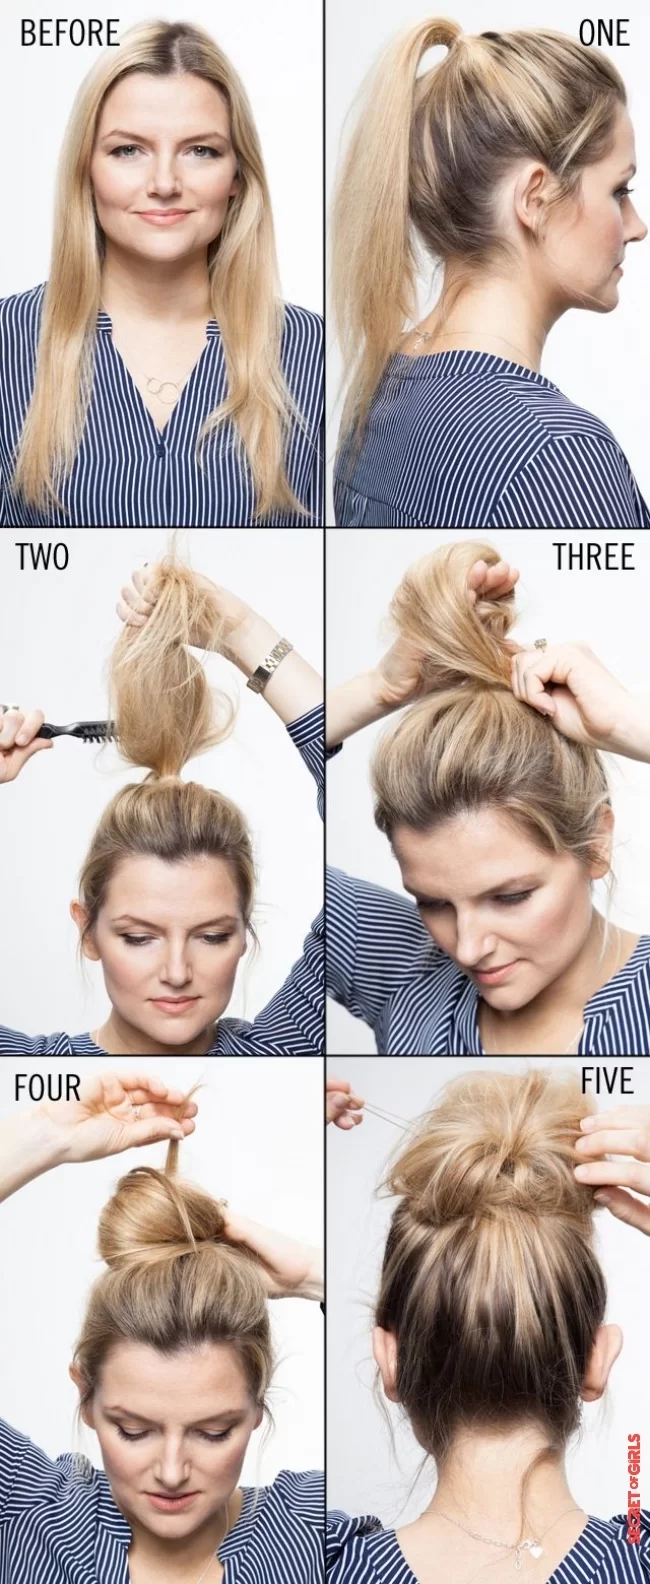 SIMPLE HAIR STYLE FOR LONG AND FINE HAIR | Hairstyles for fine hair - Tips and tricks for impressive hair styling